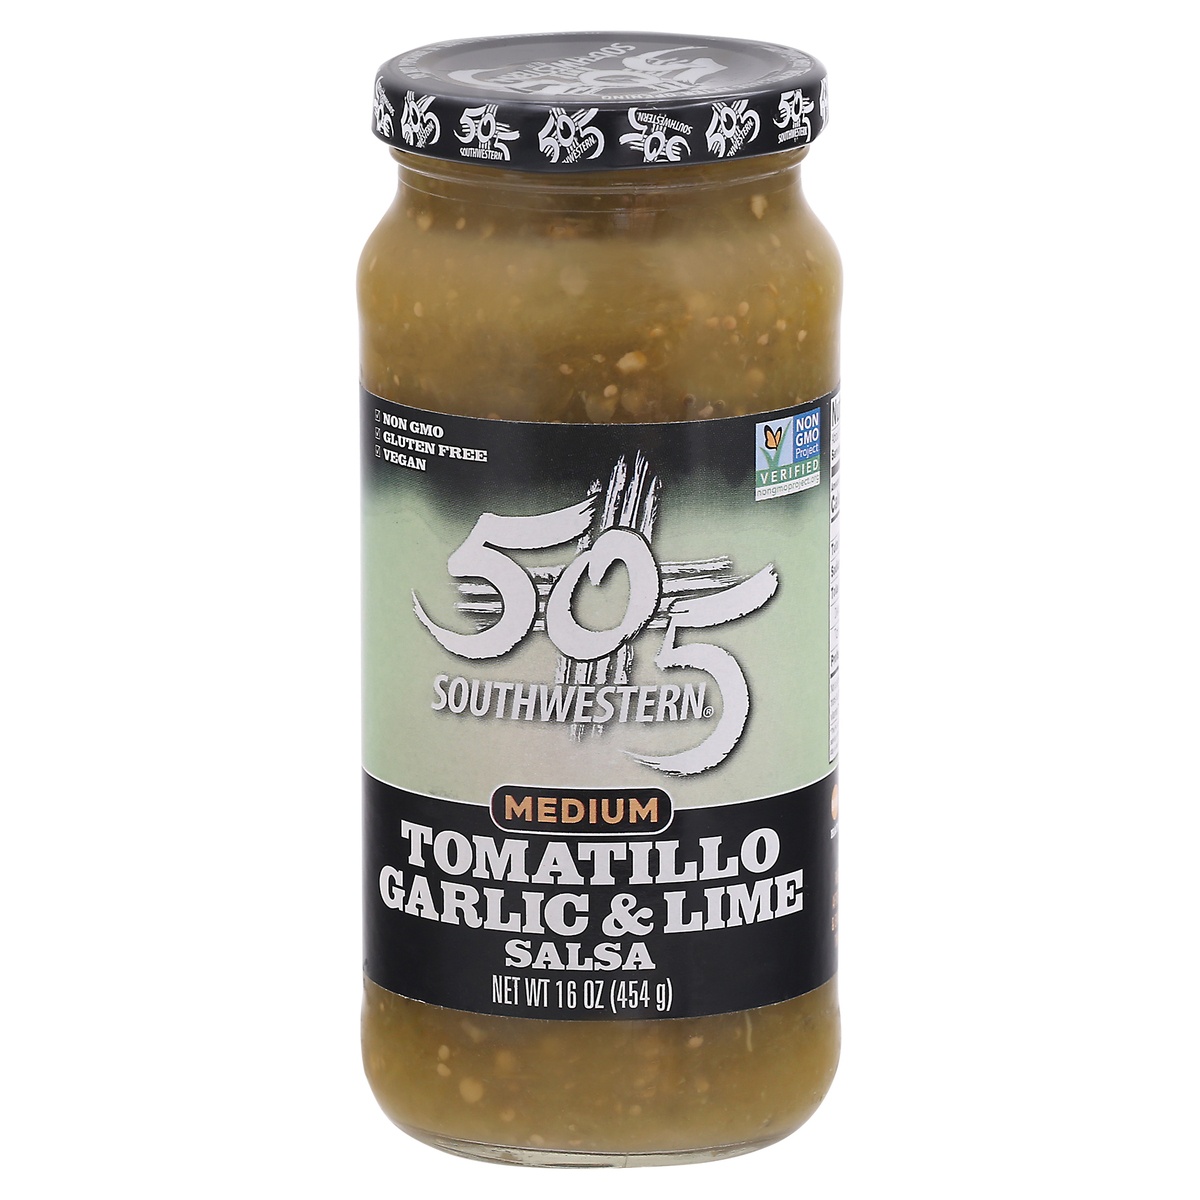 slide 1 of 1, 505 Southwestern Green Chile Salsa with Tomatillo, Garlic & Lime, 16 oz